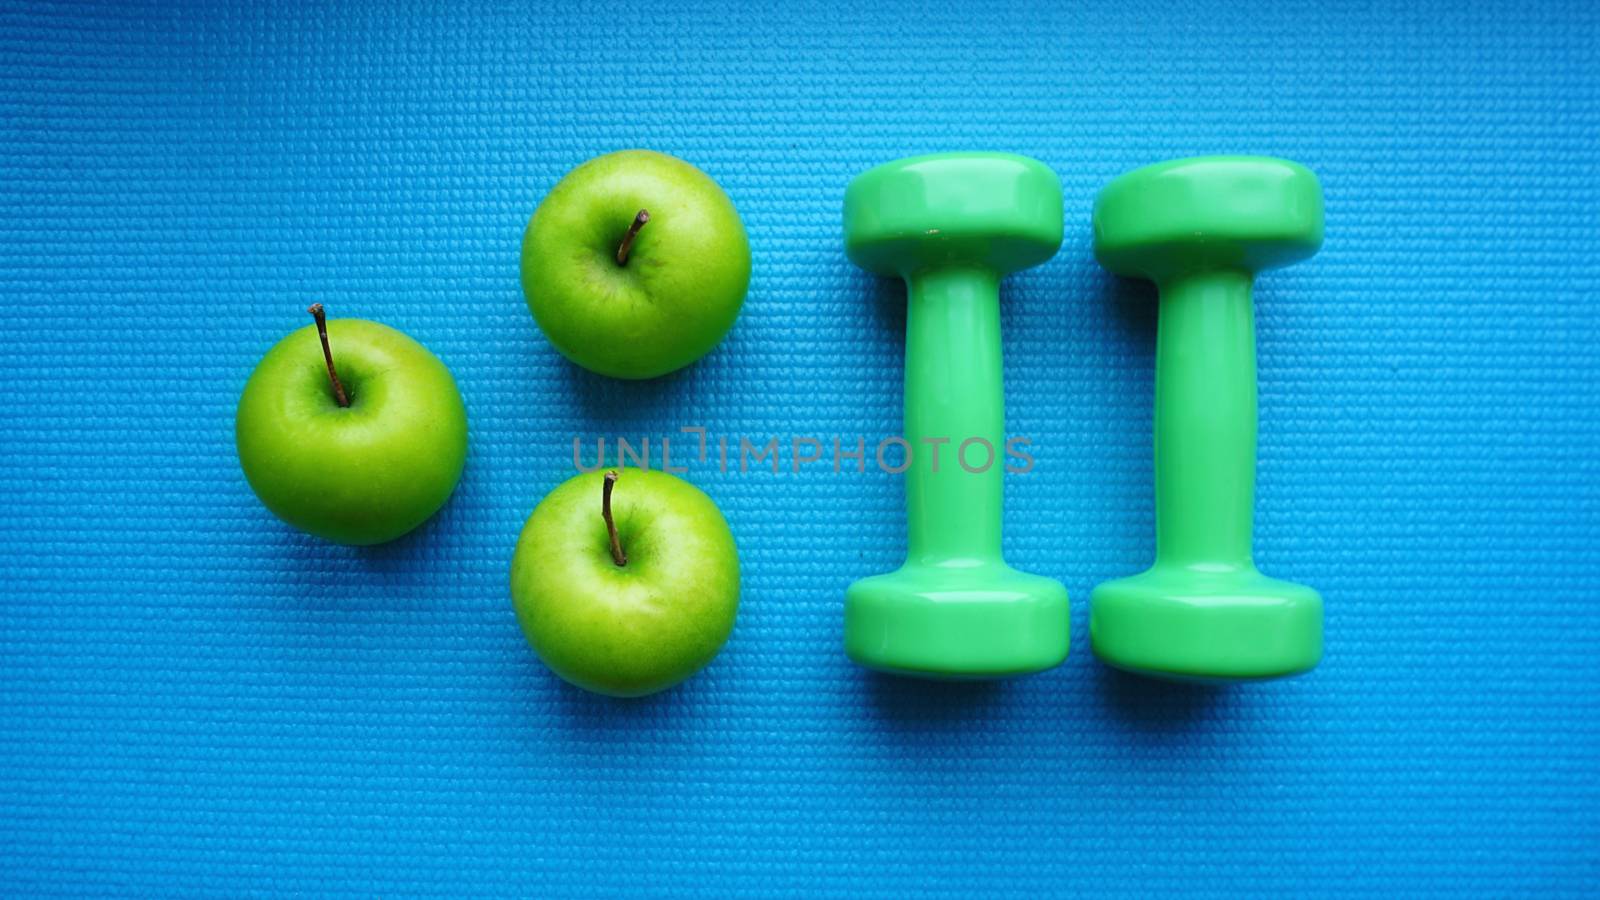 Dumbbells near green apples on blue background. Healthy lifestyle and sports concept. Apple fruit and green barbells. Health regime and fitness symbols